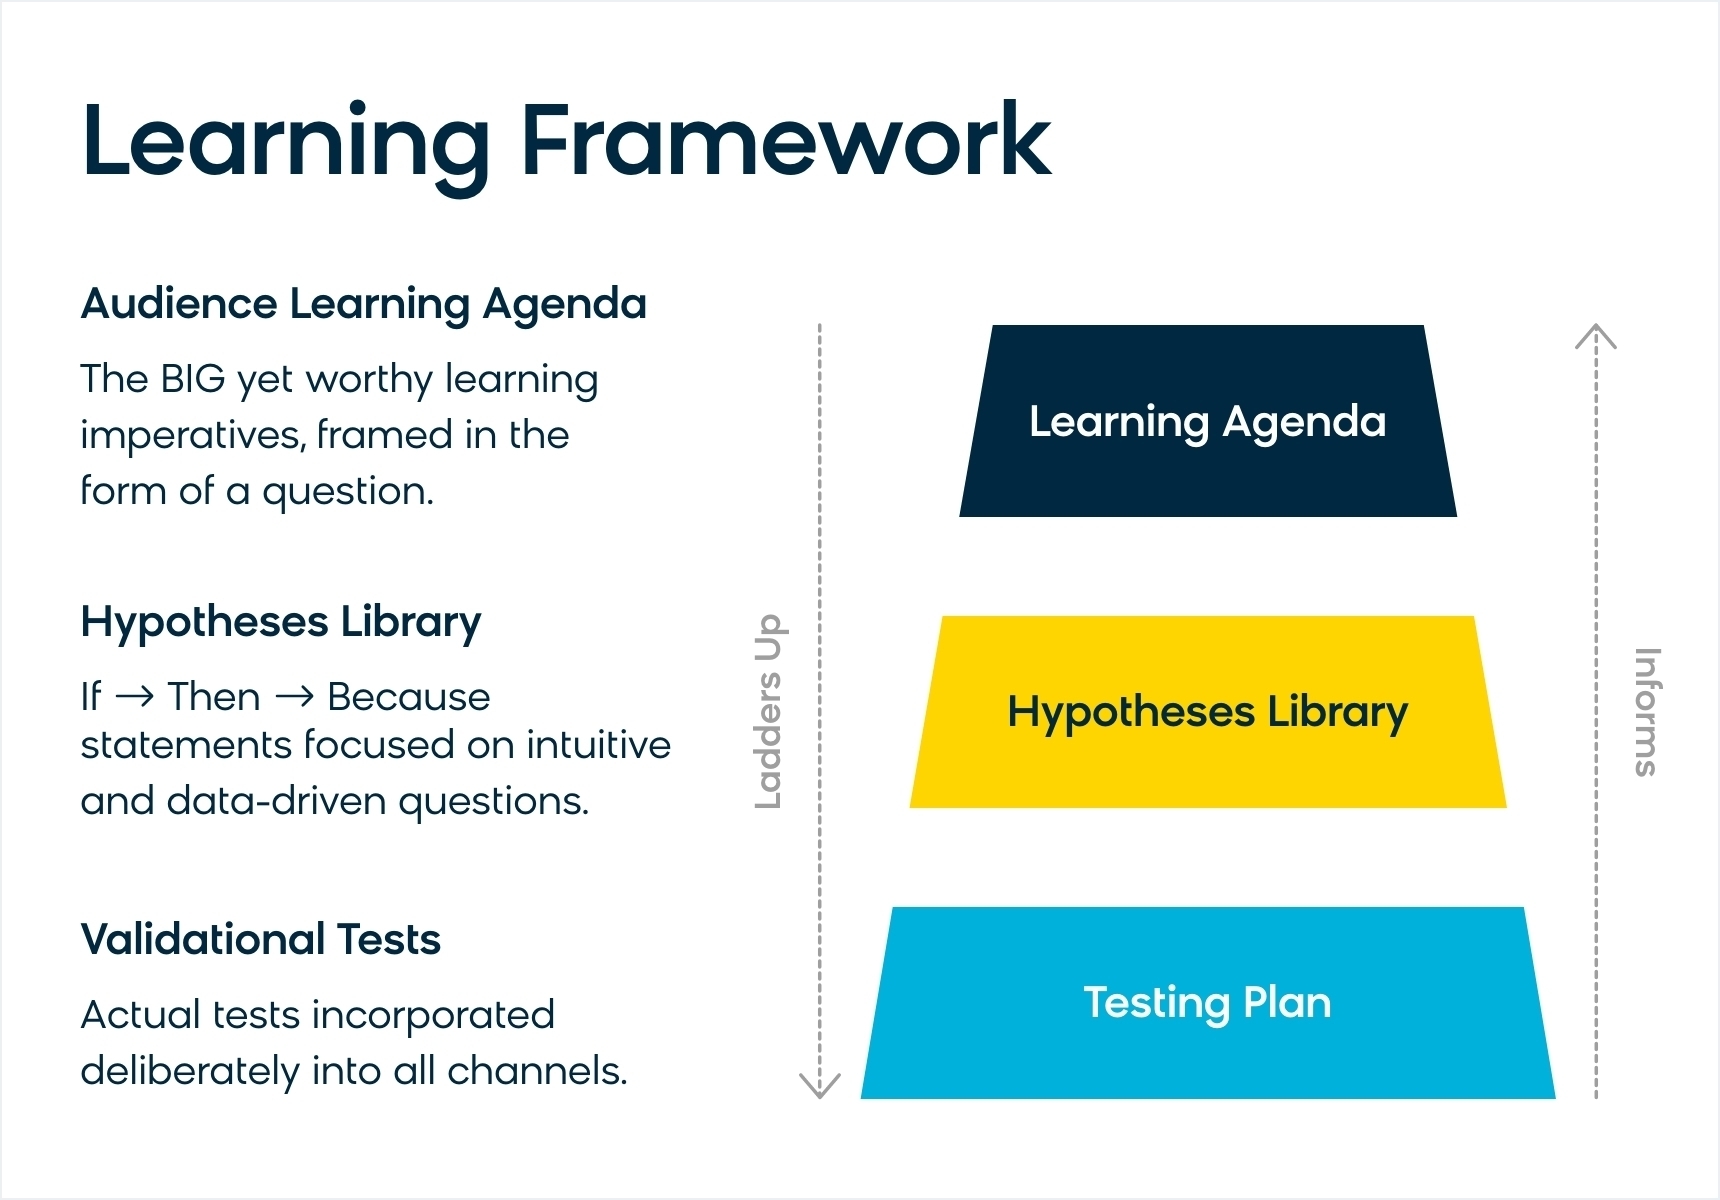 Look to the learning framework for a better way to approach your e-commerce learning strategy.